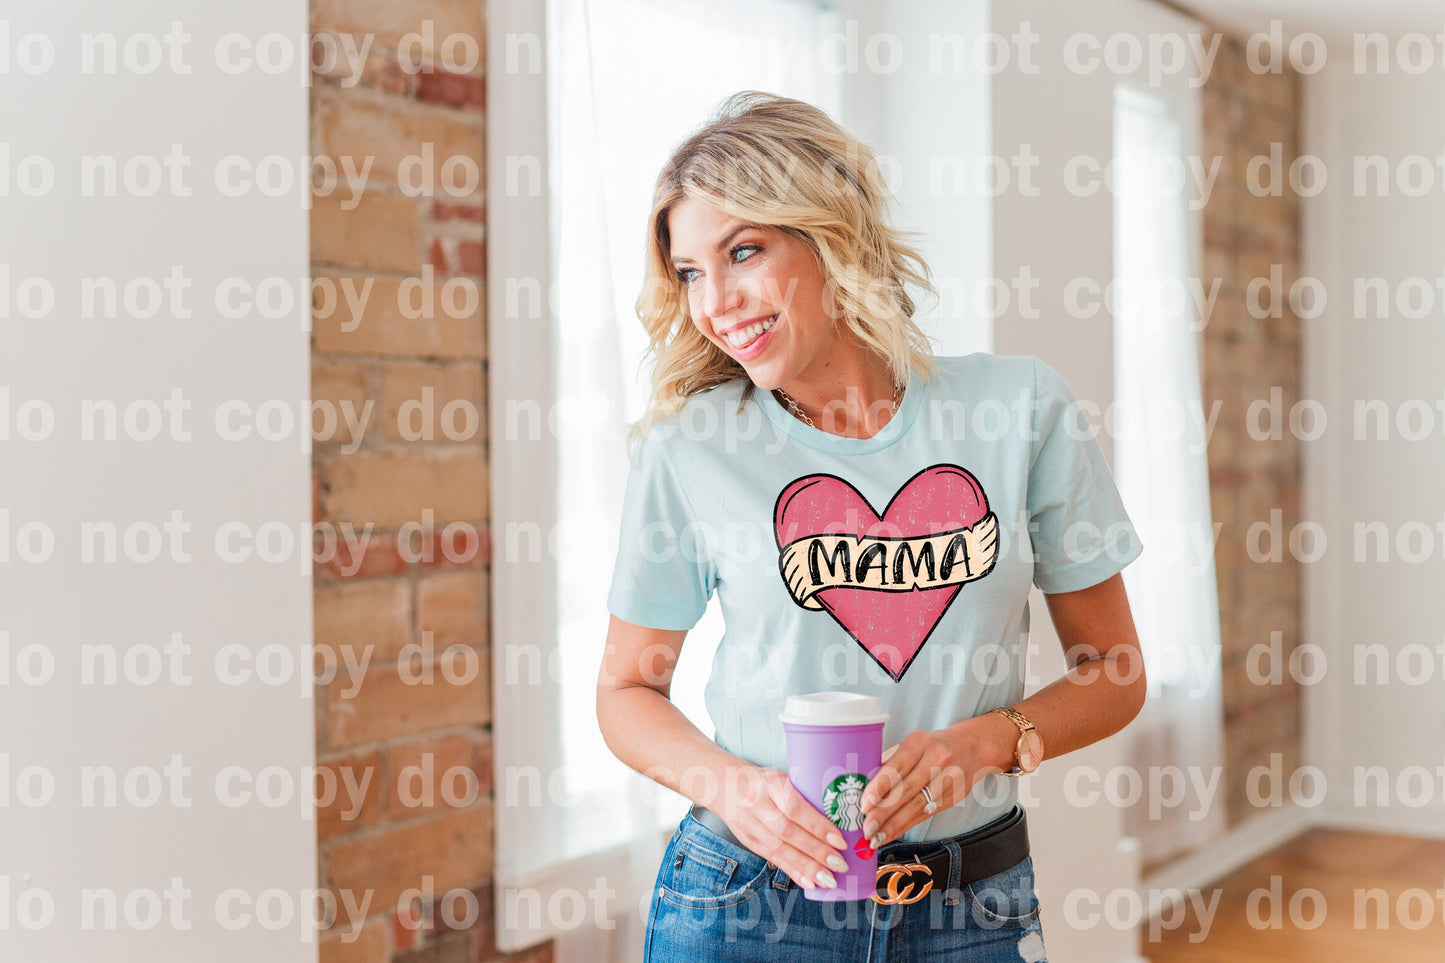 Mama Heart Distressed Full Color/One Color Dream Print or Sublimation Print